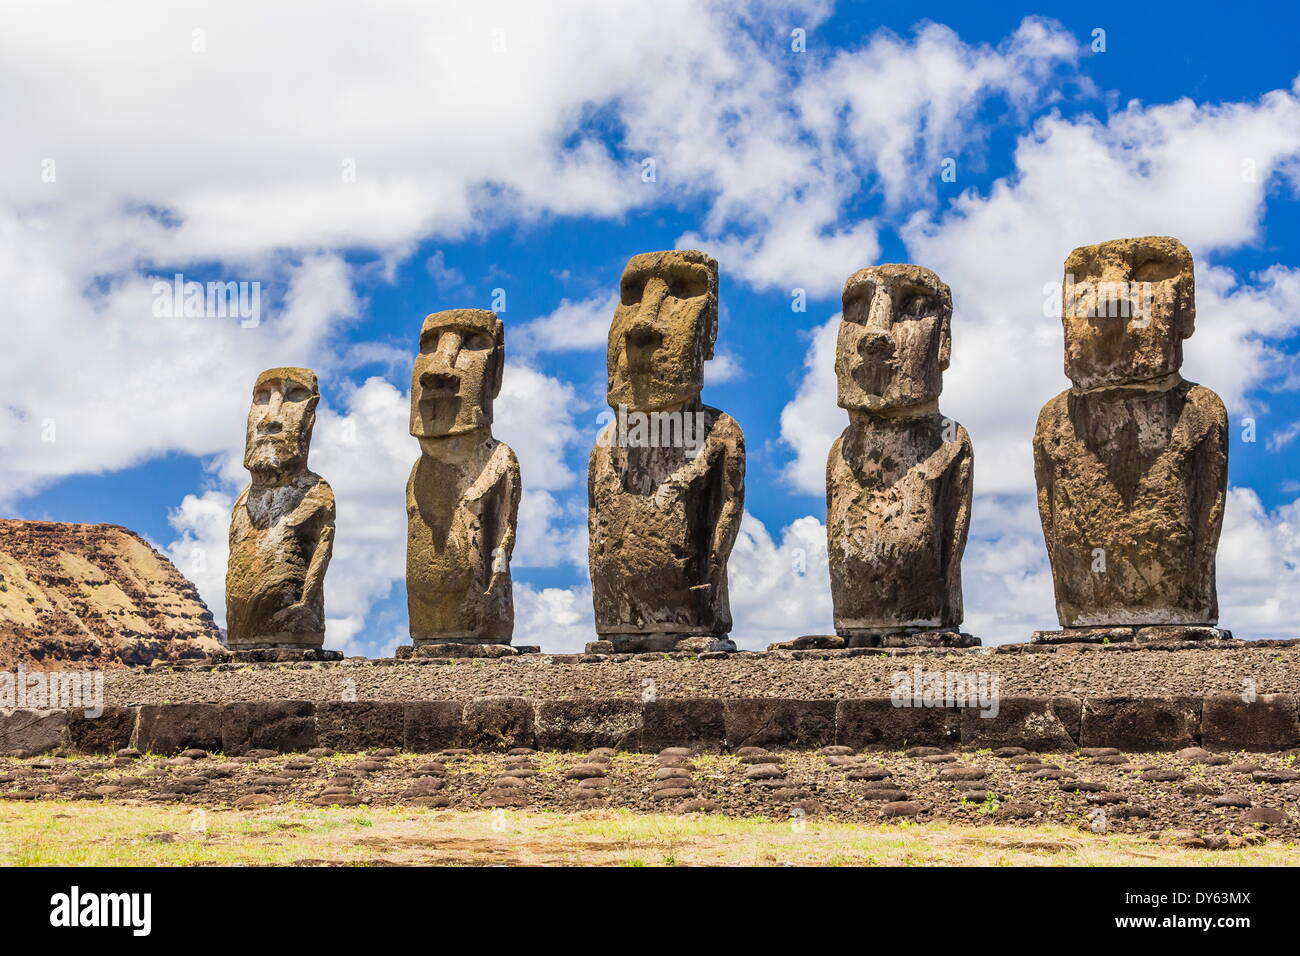 Details of moai at the restored ceremonial site of Ahu Tongariki on Easter Island (Rapa Nui), UNESCO Site, Chile Stock Photo